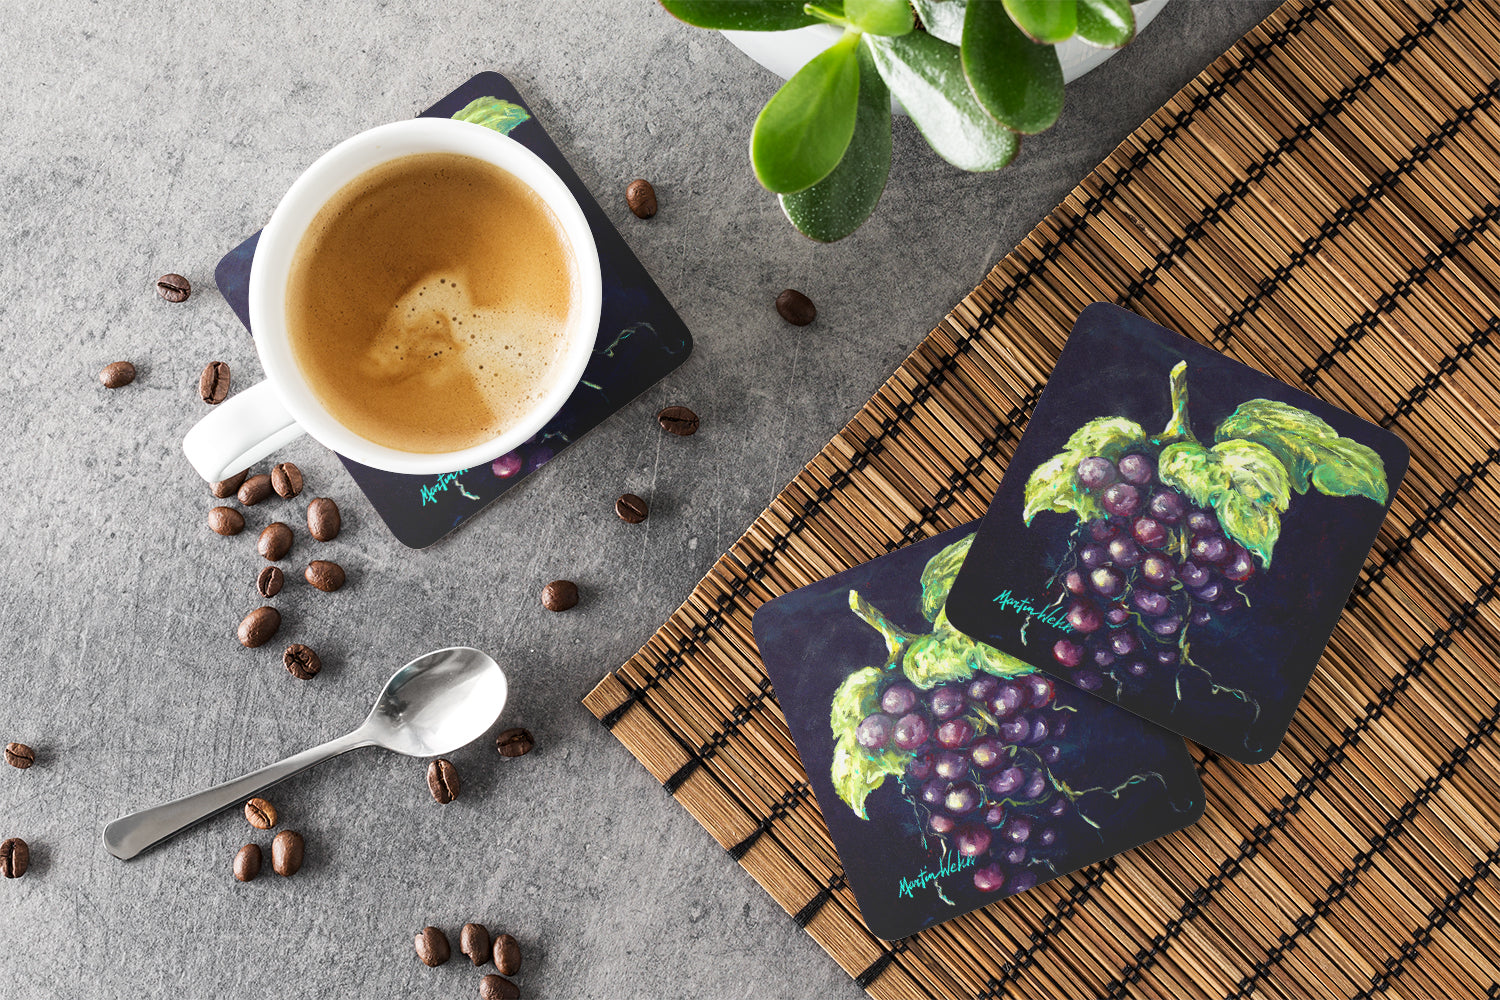 Welch's Grapes Foam Coaster Set of 4 MW1362FC - the-store.com